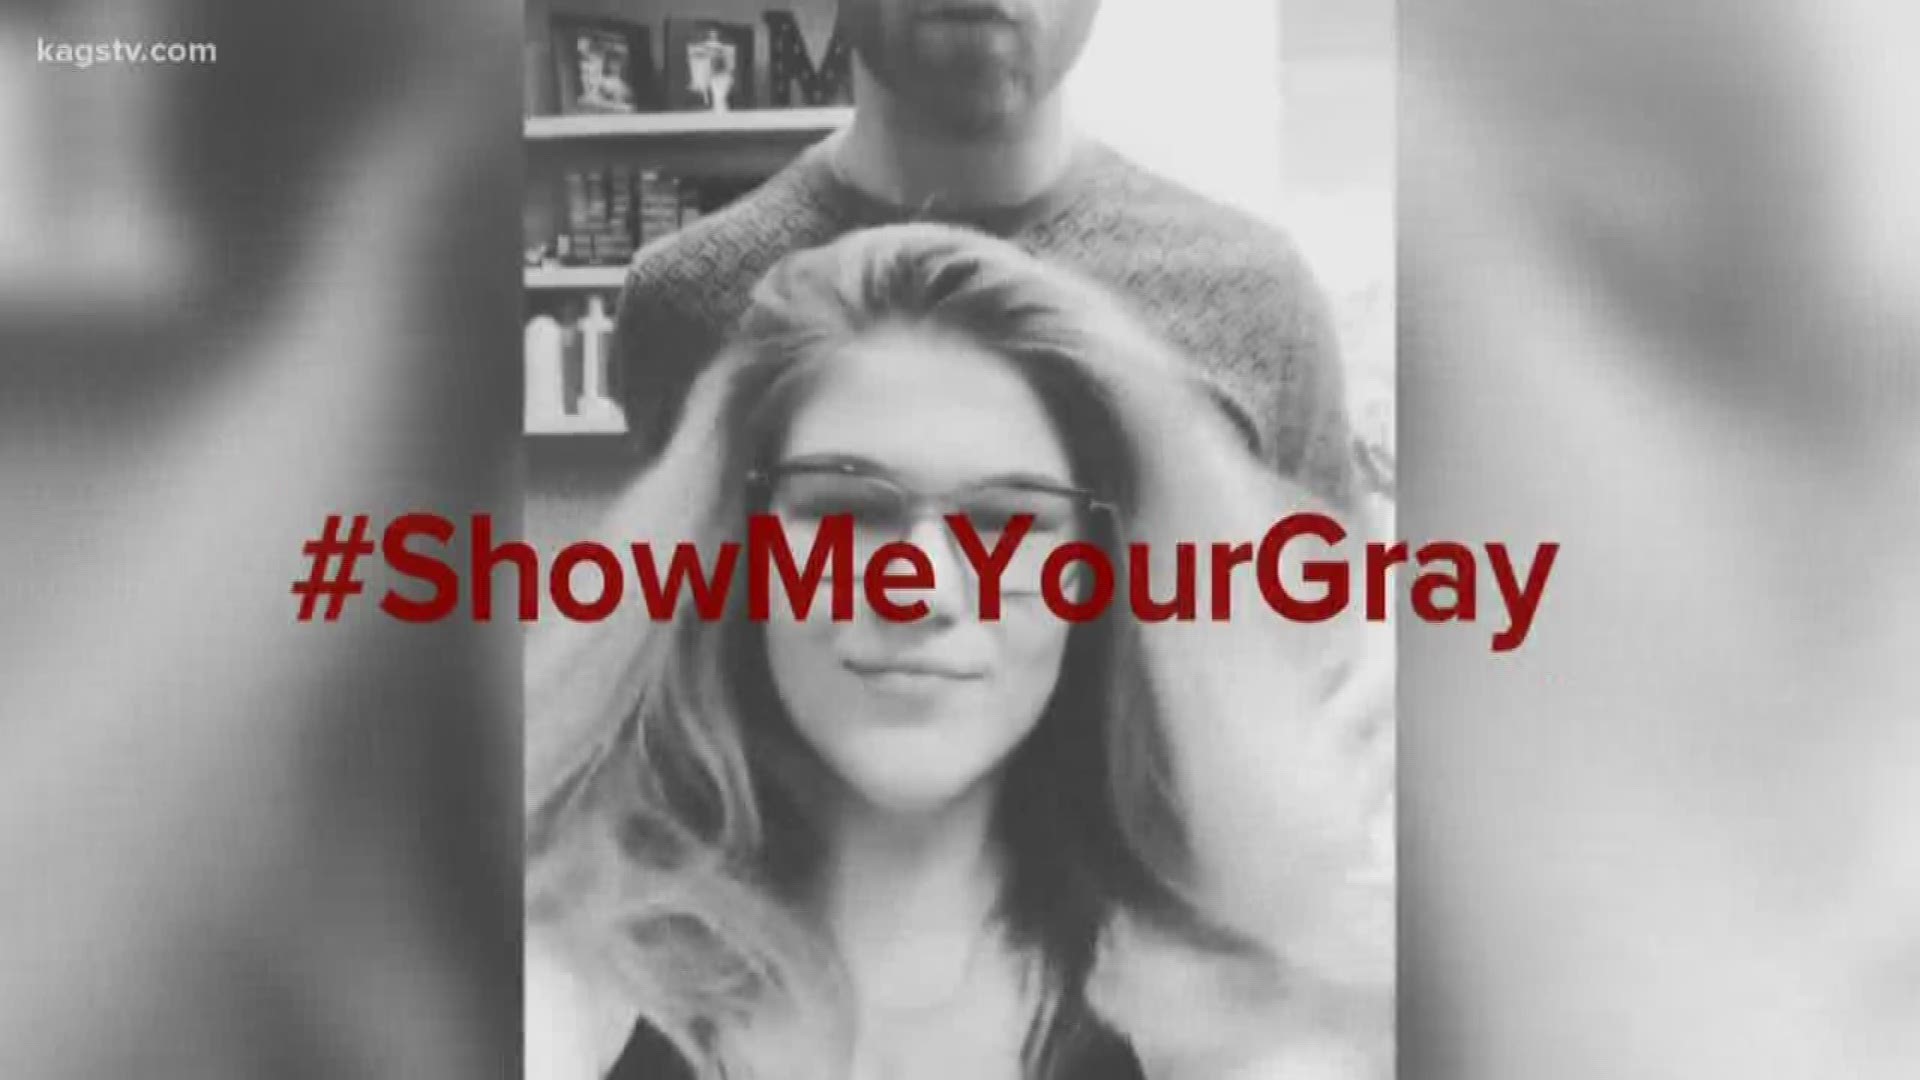 Christopher Michael Stribling started a campaign called #ShowMeYourGray to urge people not to visit hairstylists and continue to social distance.